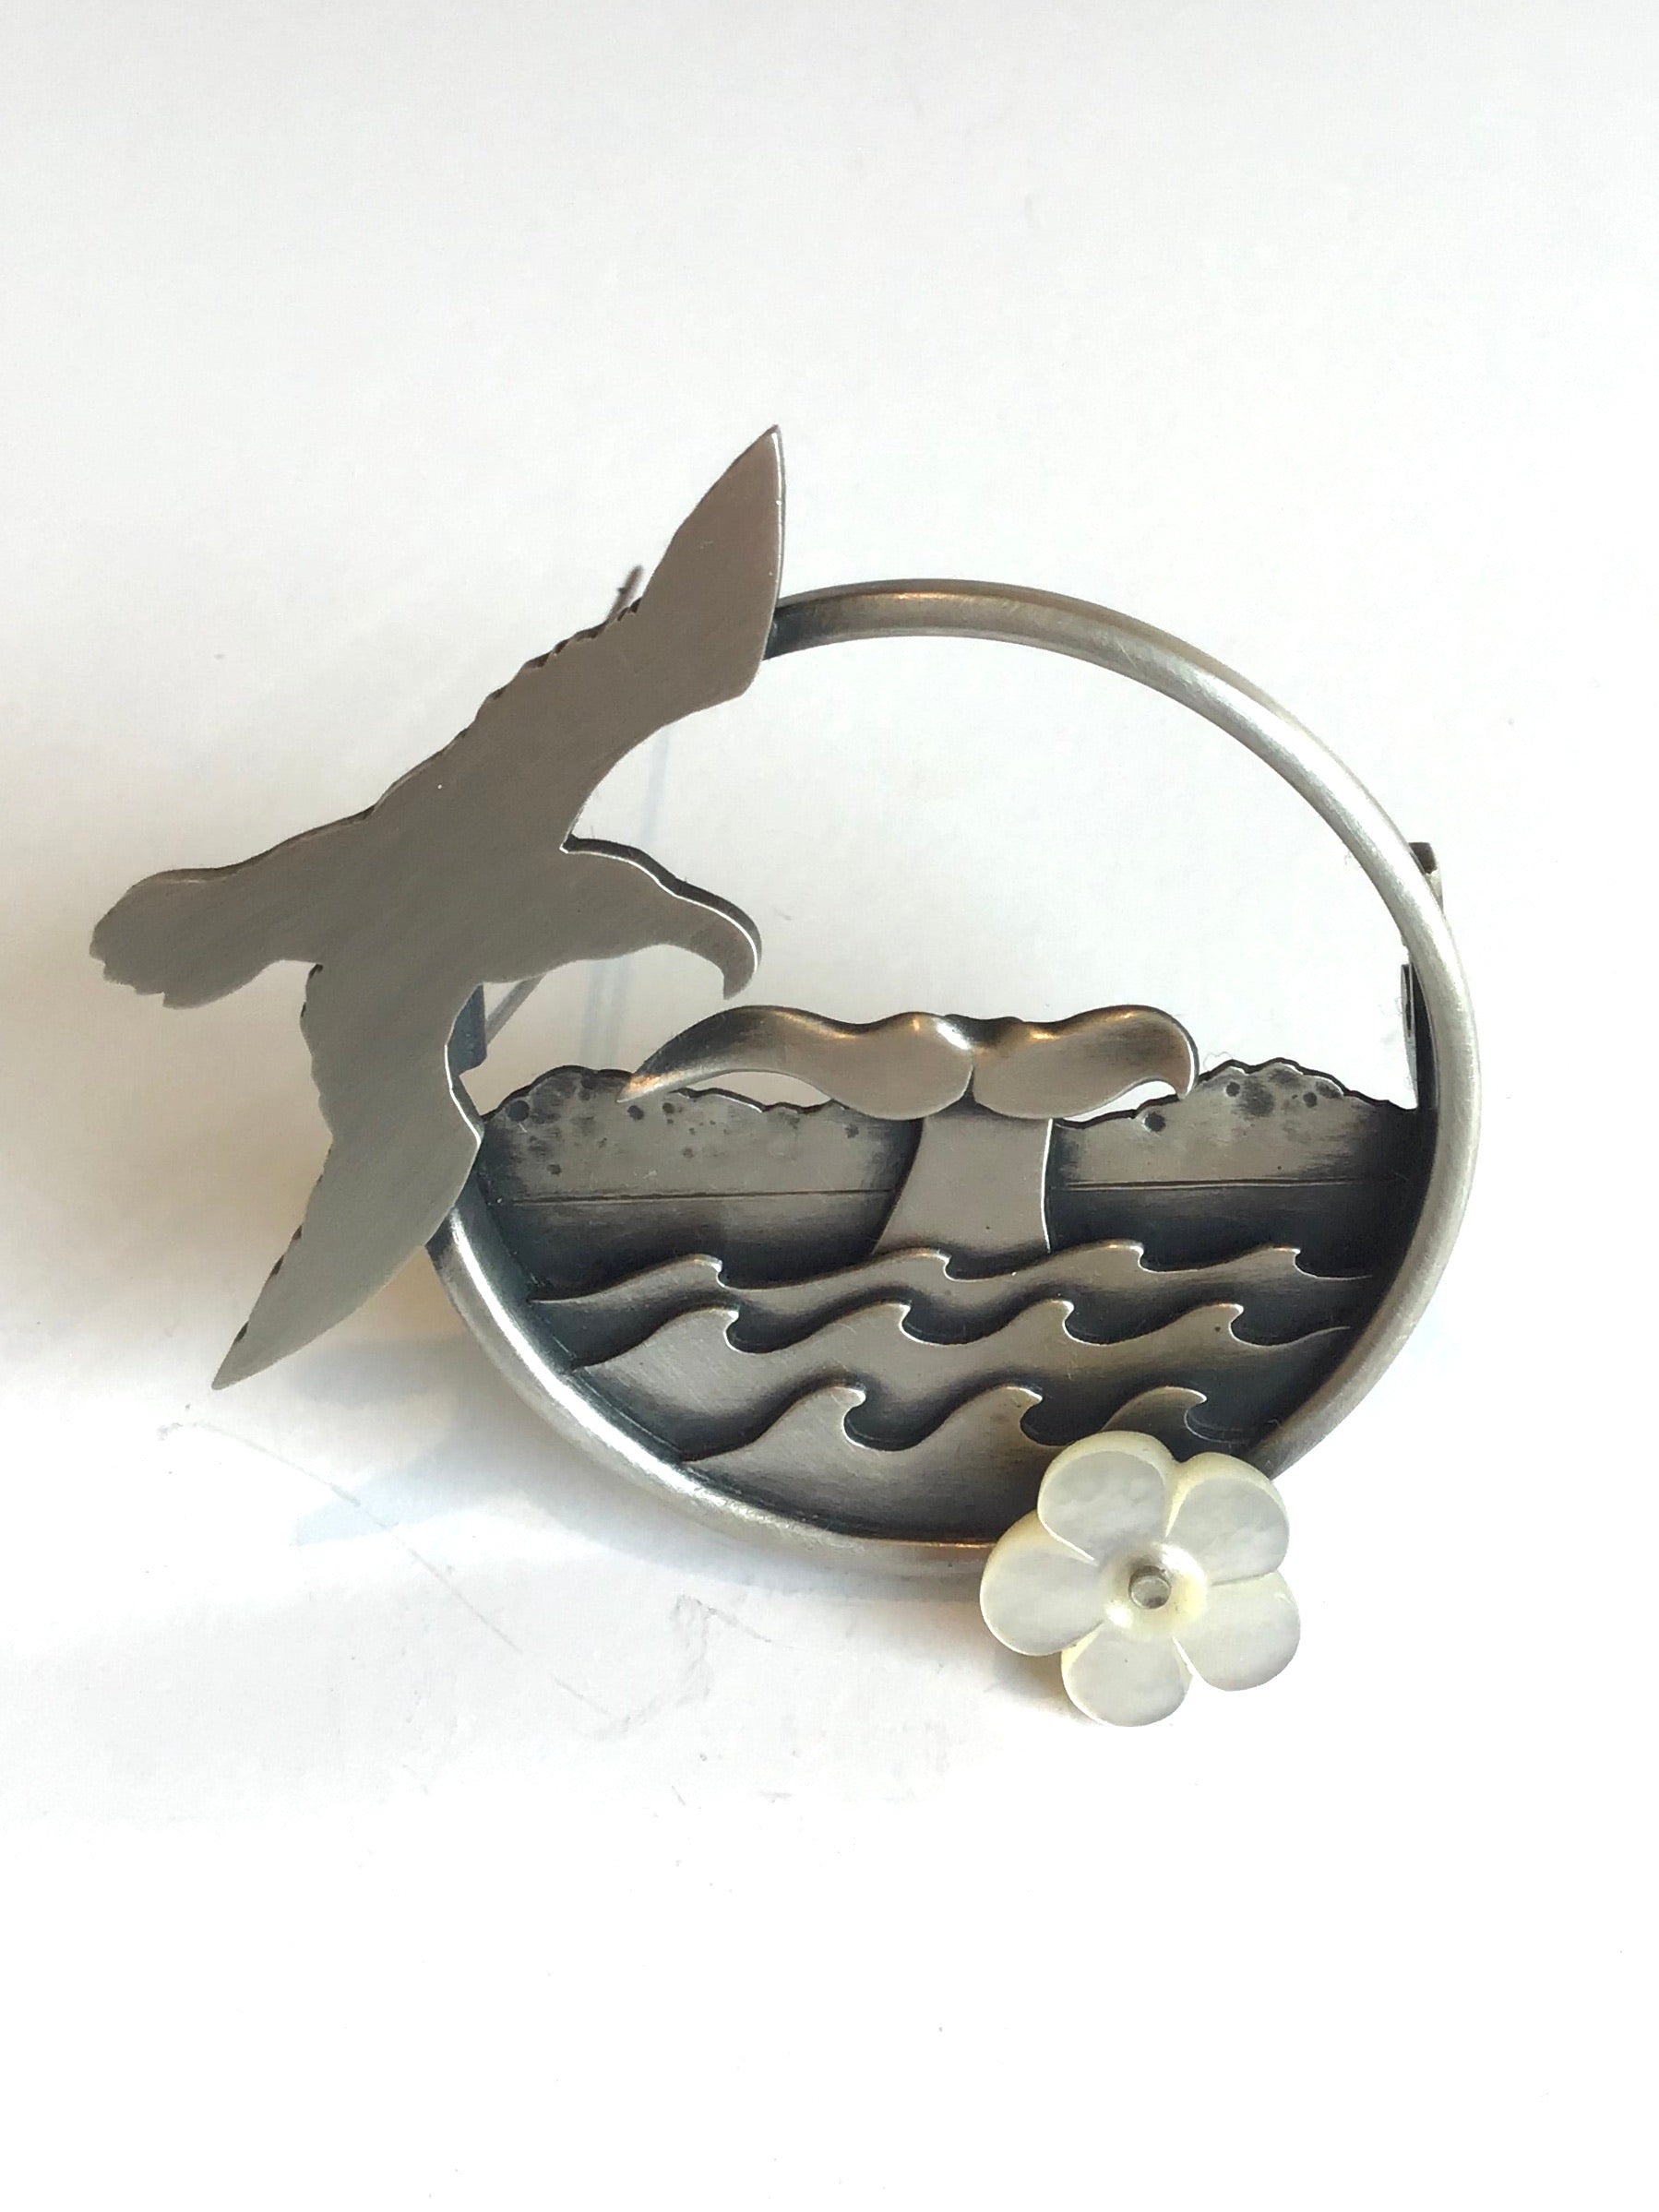 Albatross and Whale Brooch